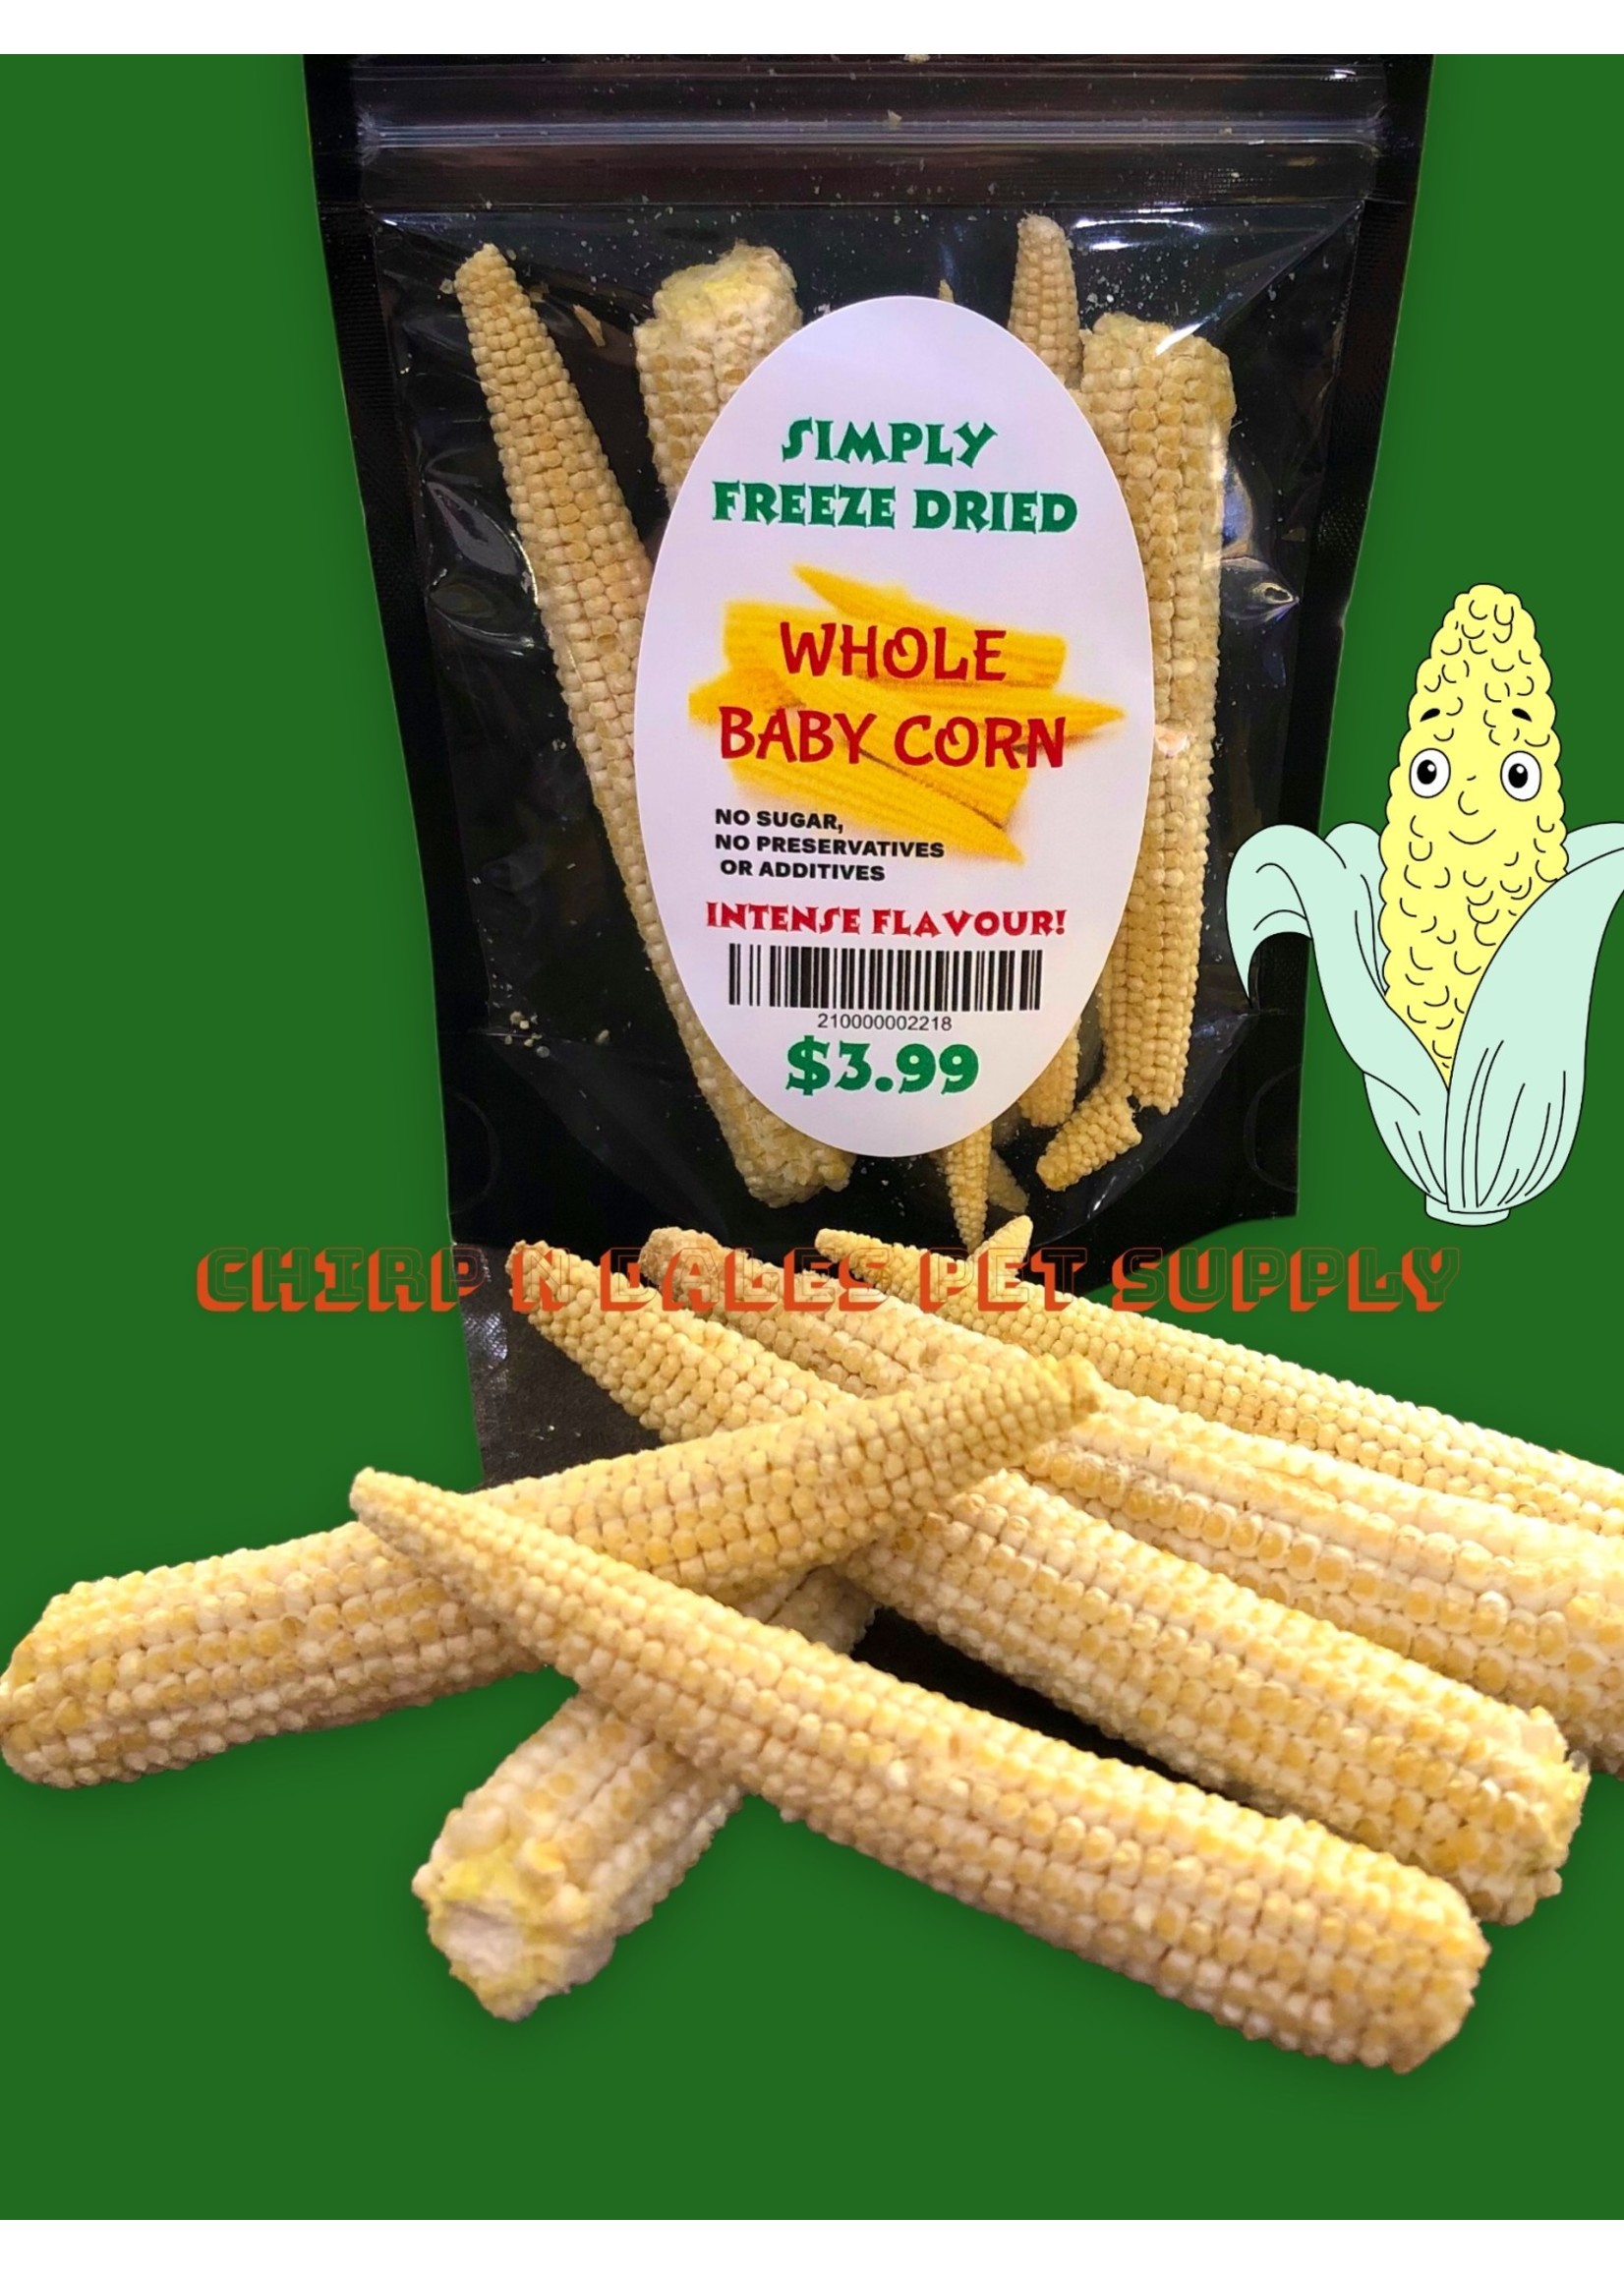 CND Freeze Dried Products SIMPLY WHOLE BABY CORN FREEZE DRIED